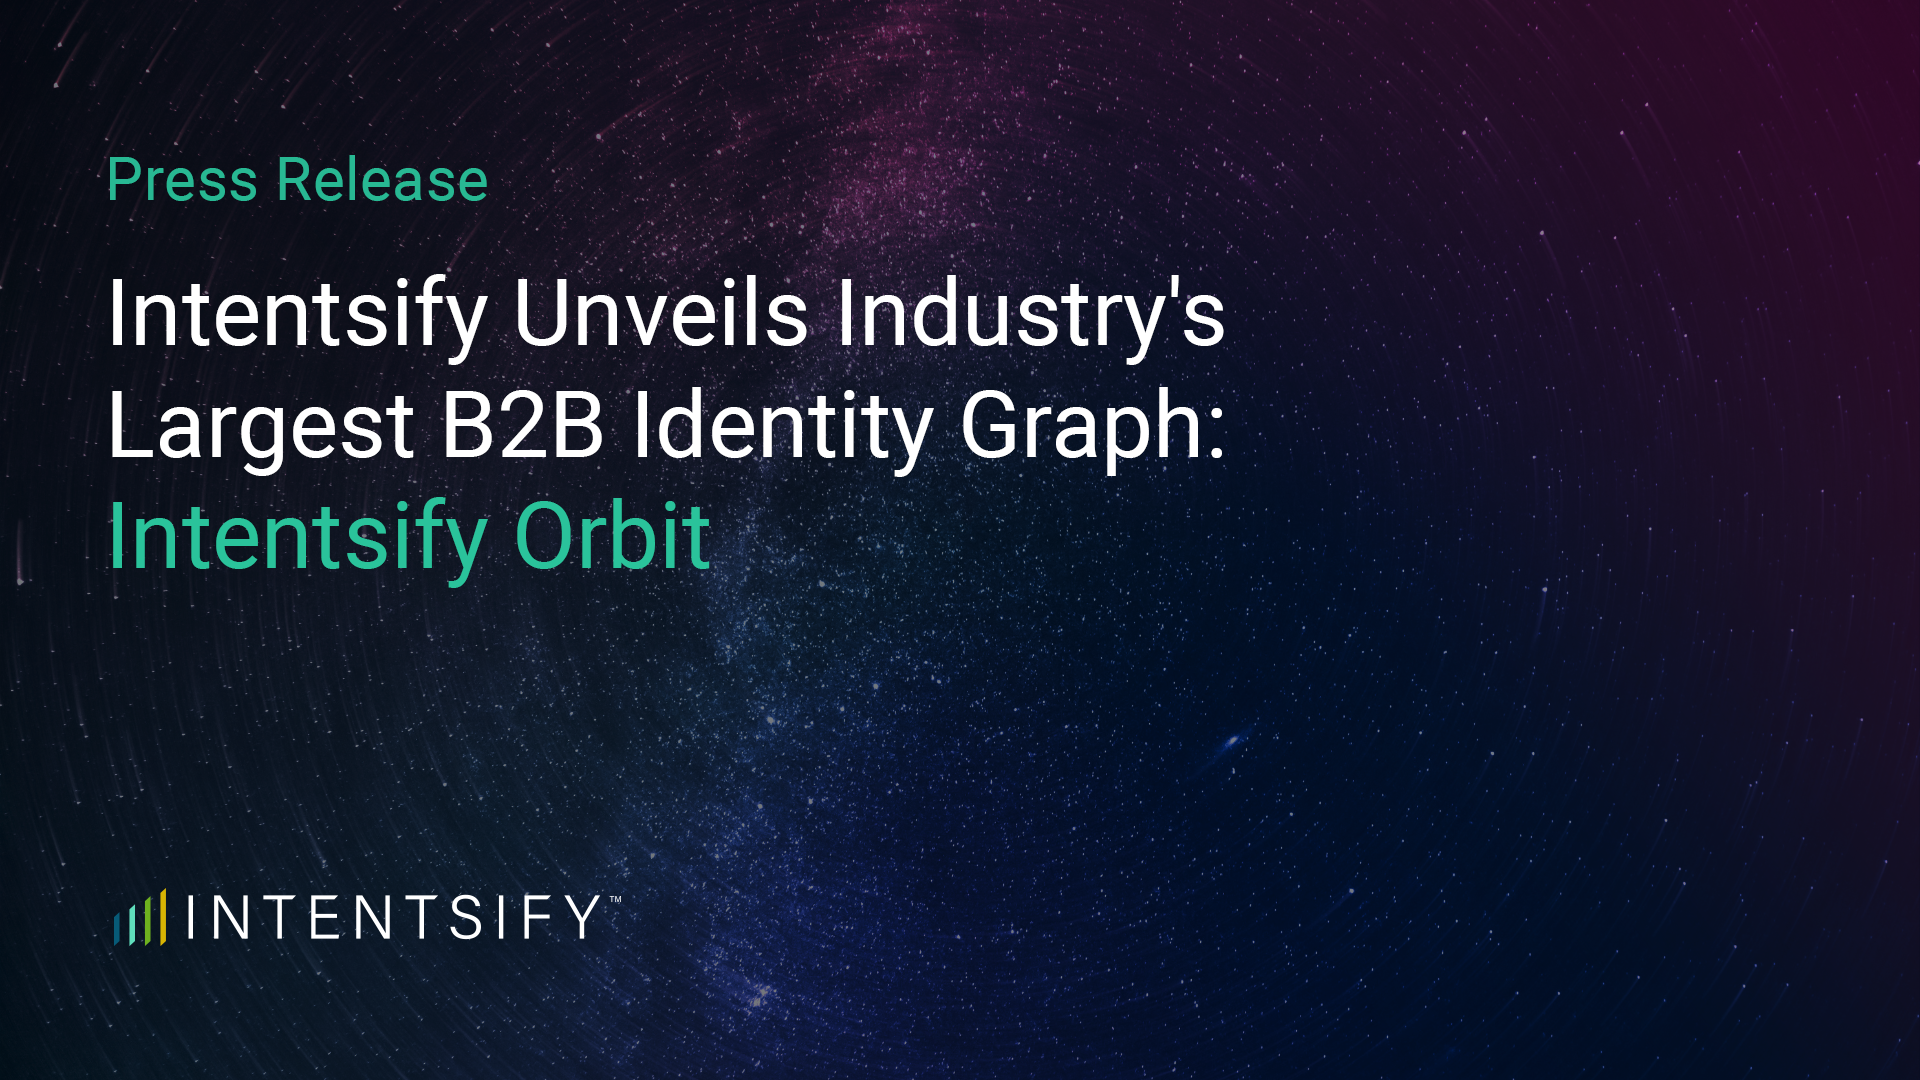 Intentsify Unveils the Industry’s Largest B2B Identity Graph, Elevating Intent-Driven Marketing Solutions